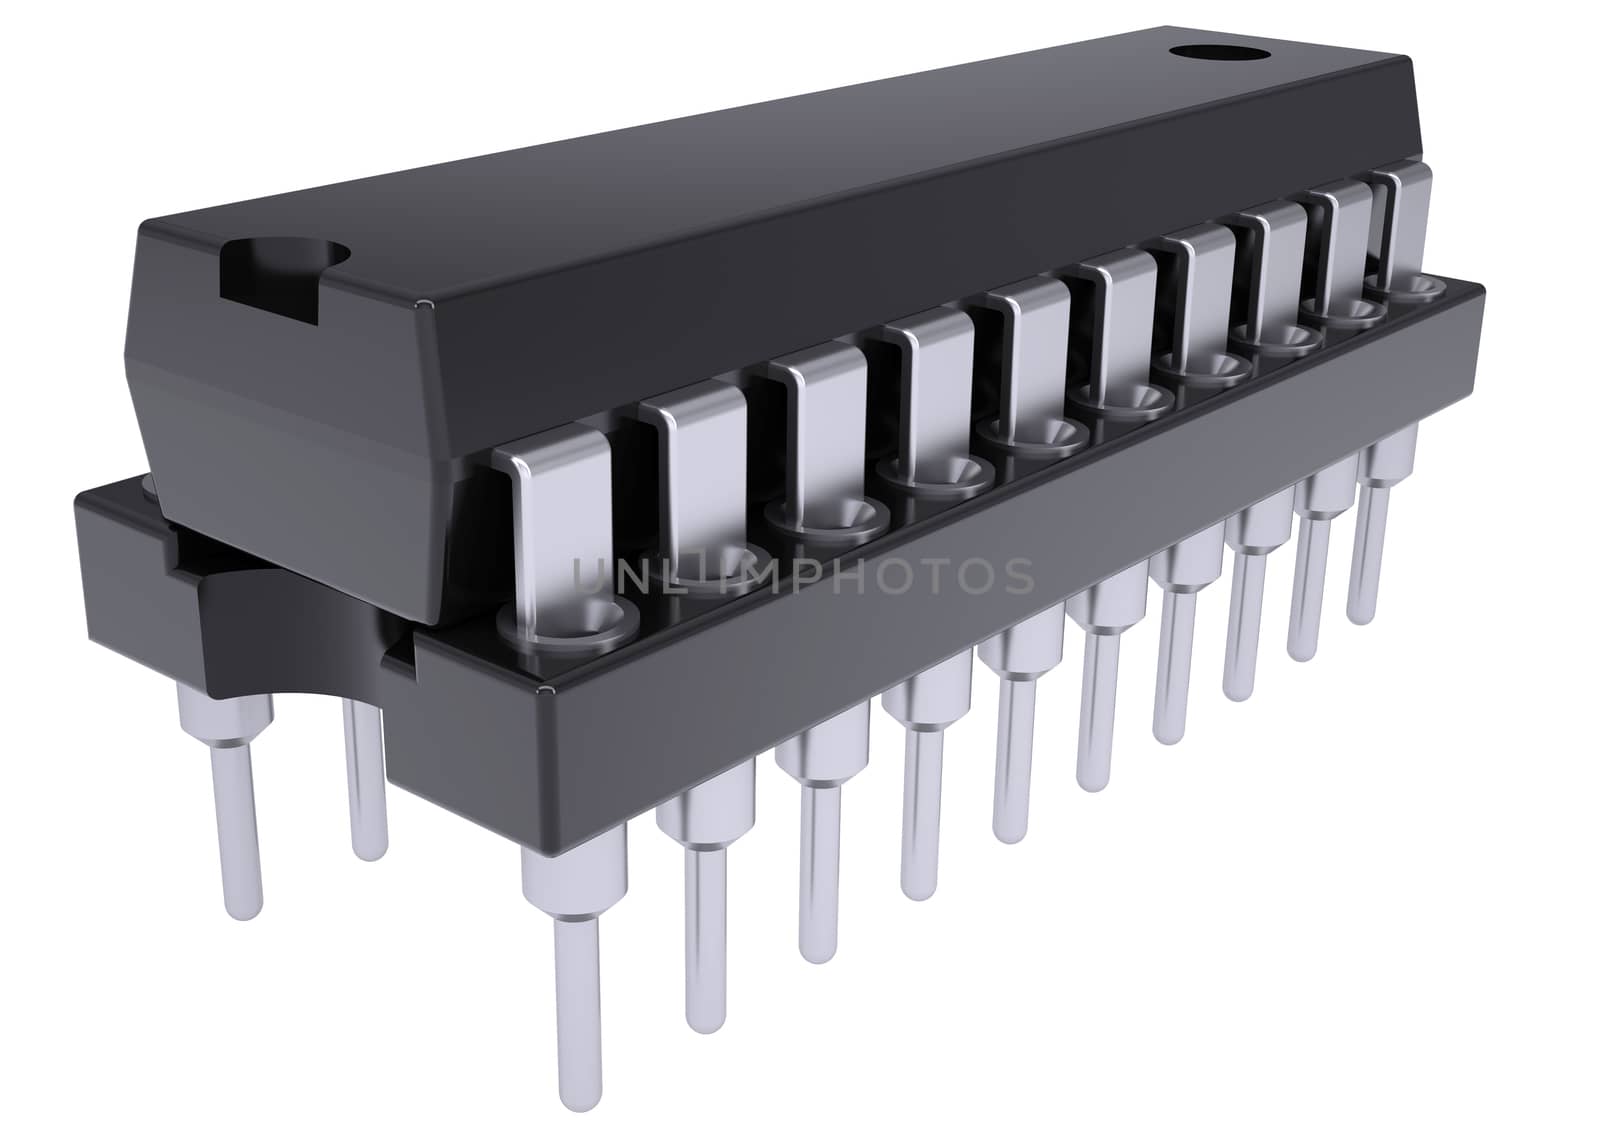 Microchip. Isolated render on a white background